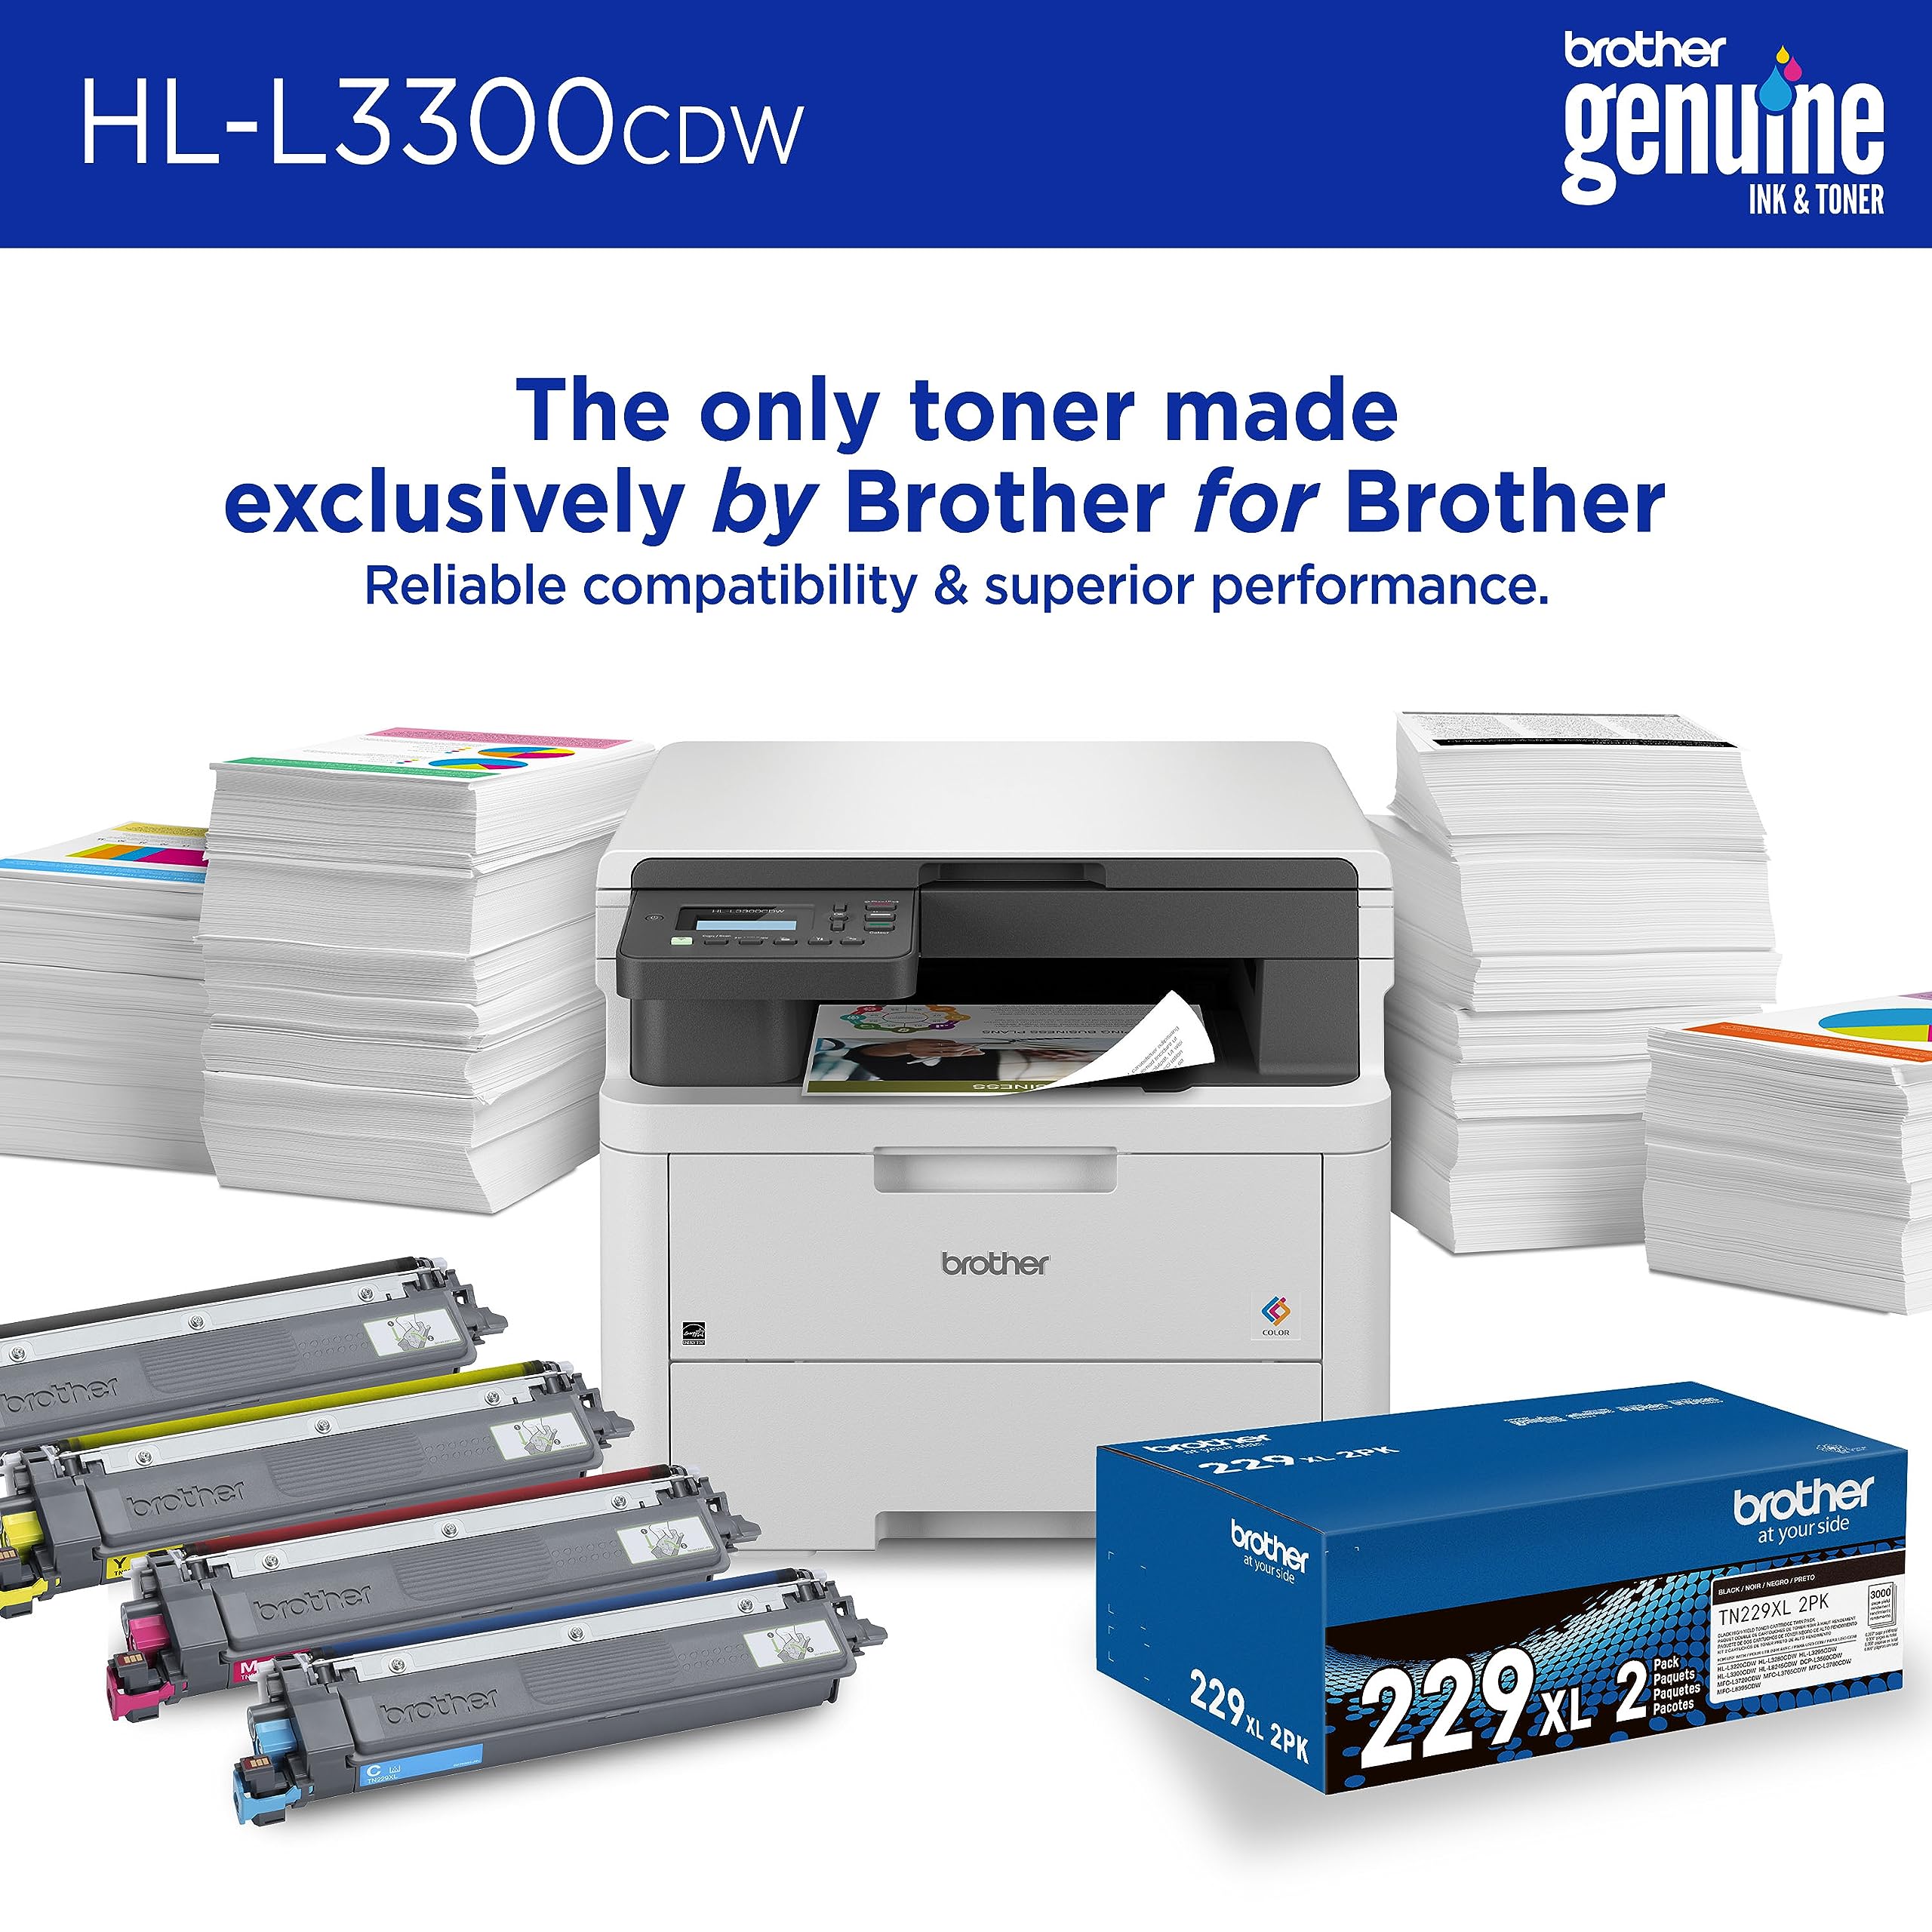 Brother HL-L3300CDW Wireless Digital Color Multi-Function Printer with Laser Quality Output, Copy & Scan, Duplex, Mobile | Includes 4 Month Refresh Subscription Trial ¹ Amazon Dash Replenishment Ready